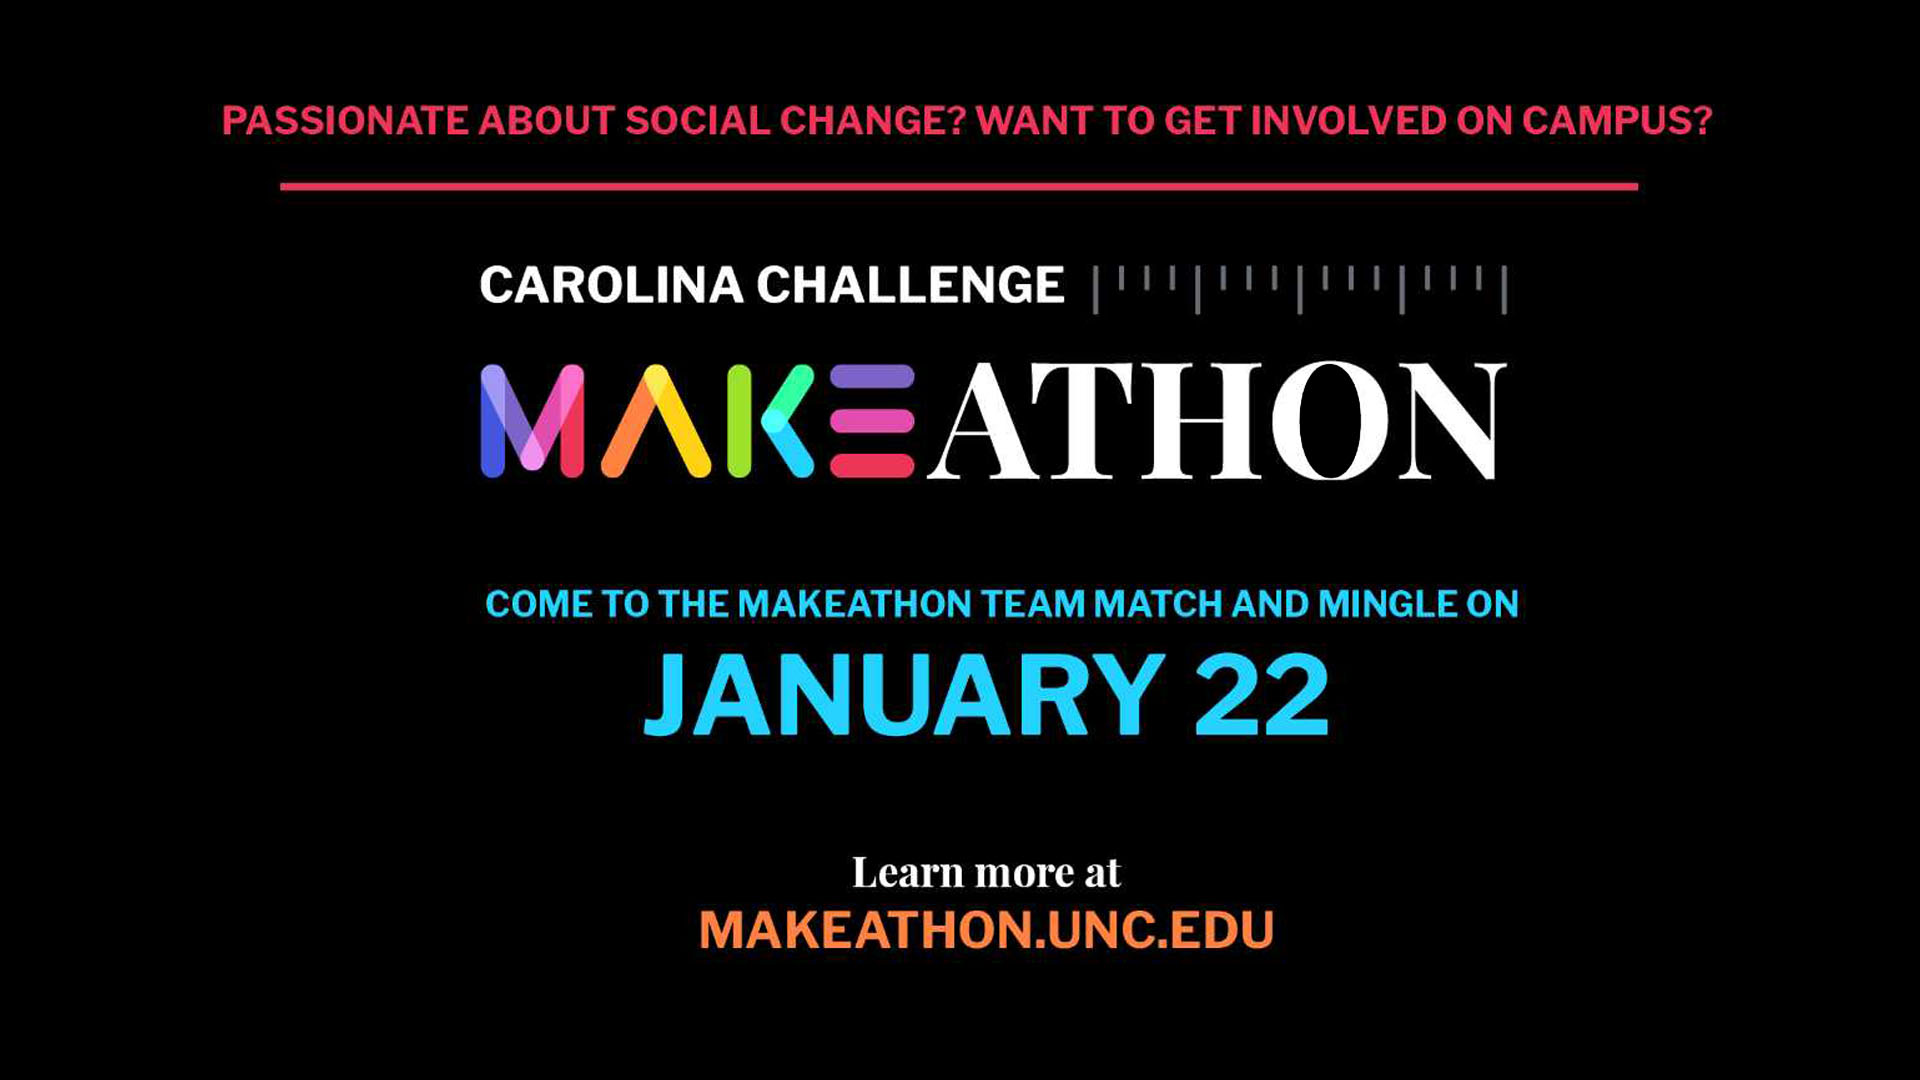 Passionate about social change? Want to get involved on campus? Come to the Carolina Makeathon Team Match and Mingle on January 22. Learn more at makeathon.unc.edu!